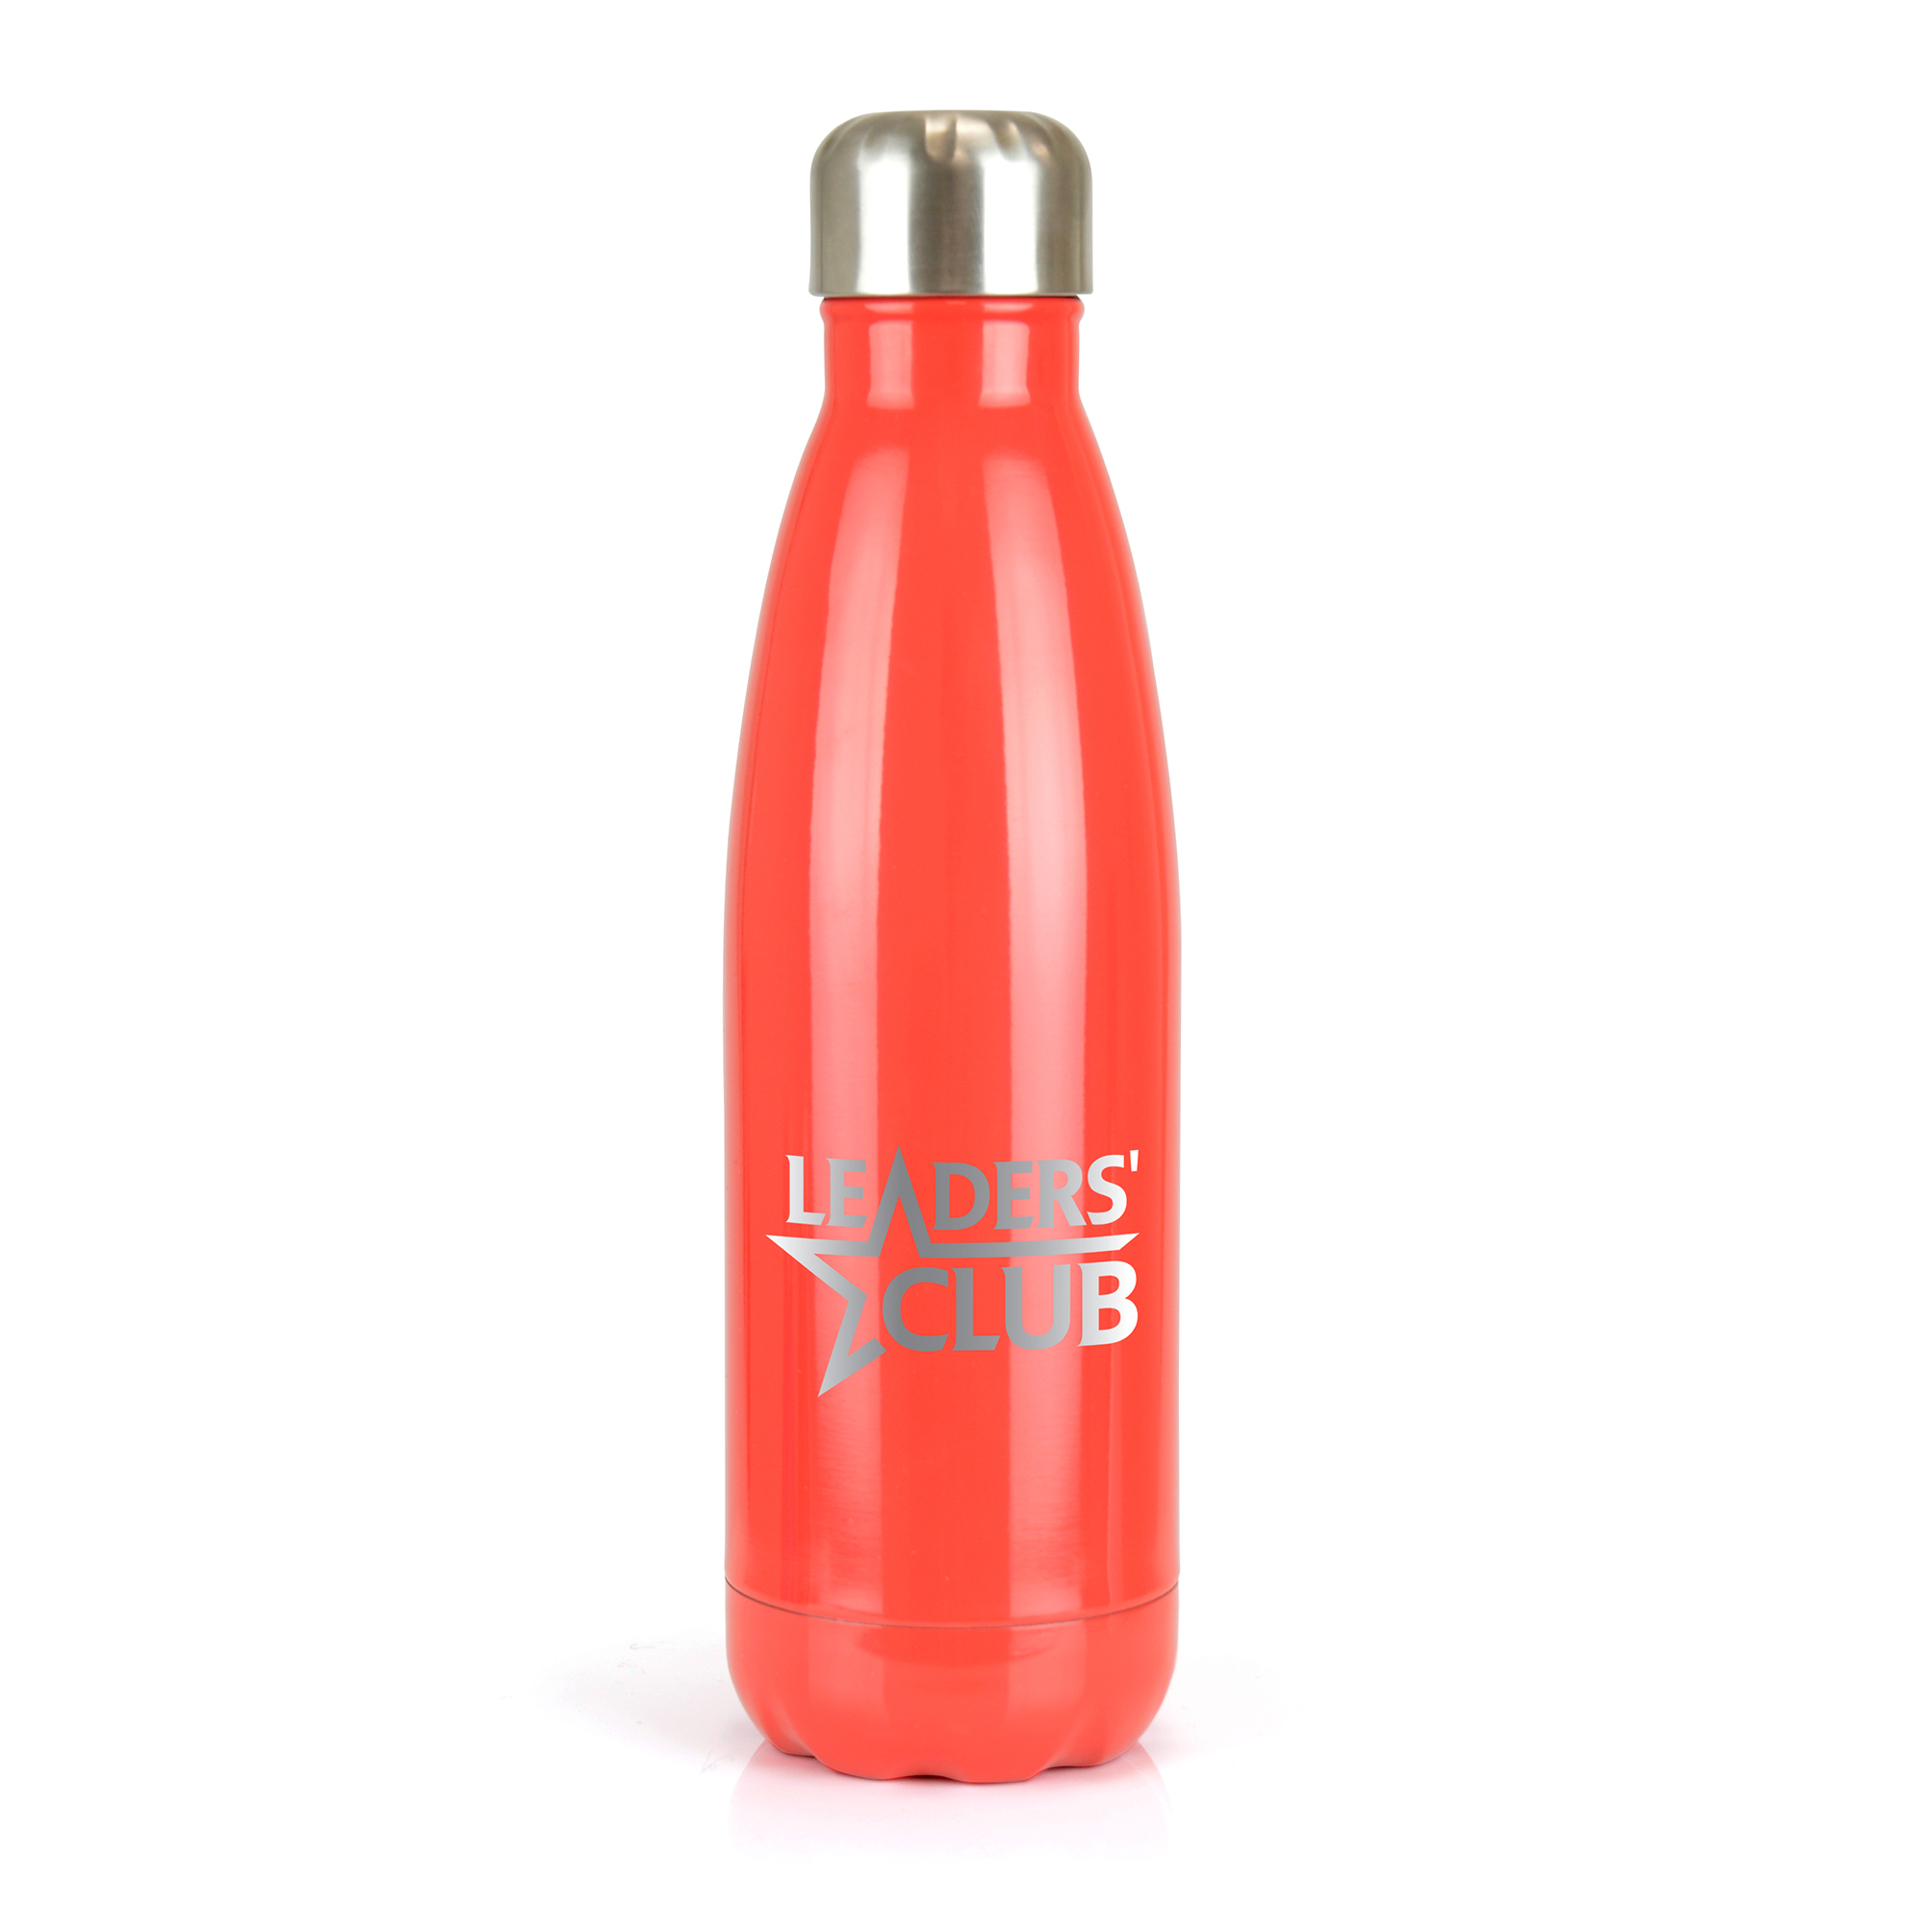 Ashford shine bottle in red with print